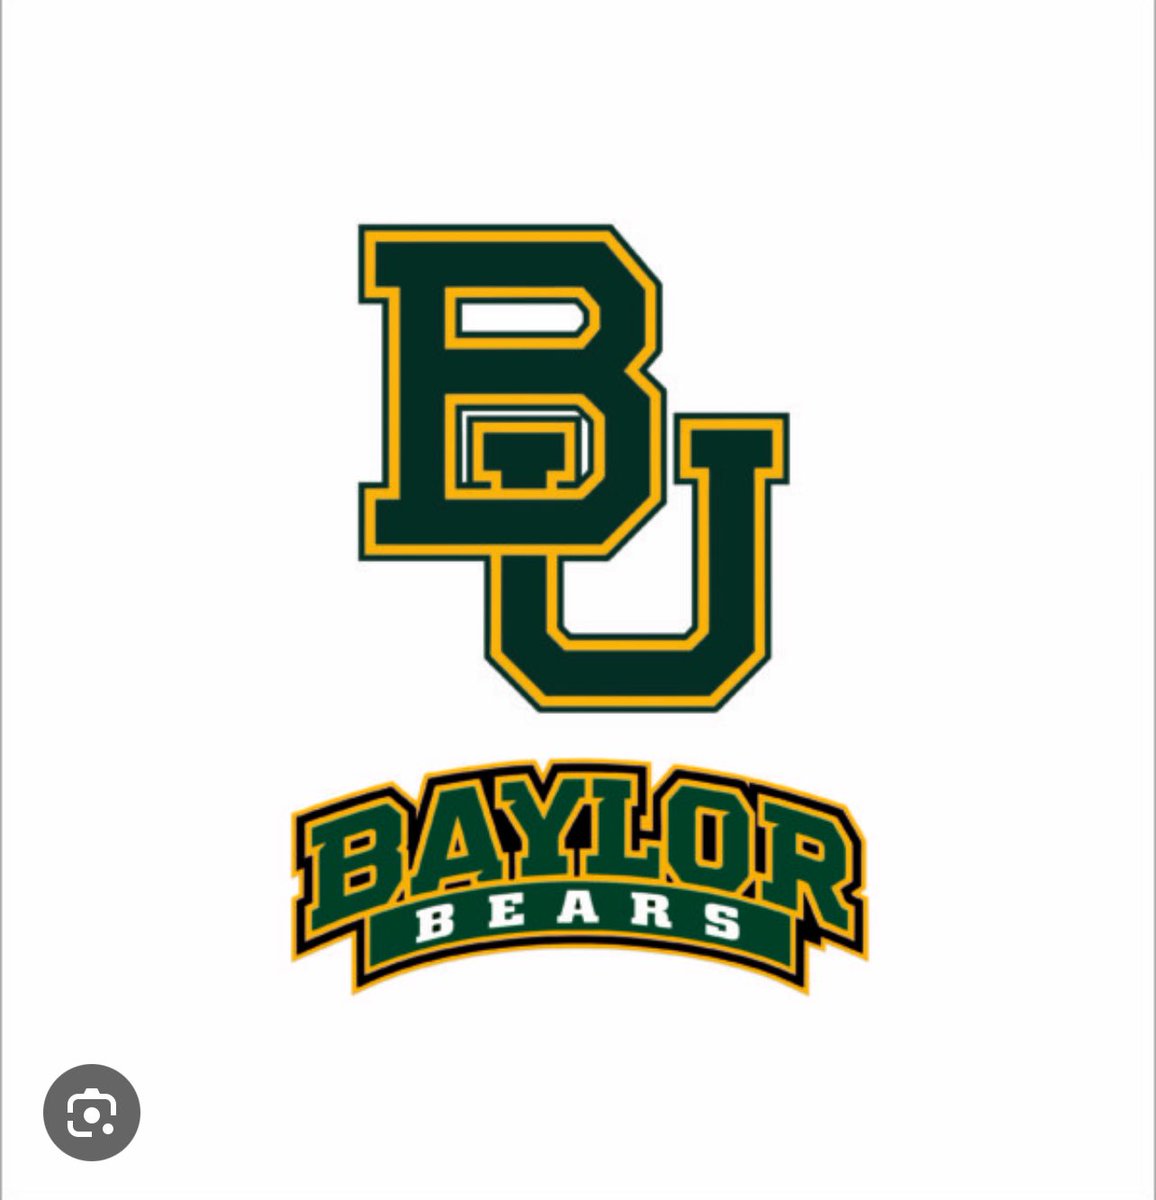 #AGTG After a great conversation with @CoachK_Hall I am blessed to receive a offer from Baylor University .@DubG18 @ConstanceW48657 @WhiteCarnell @PrepRedzoneTX @natec558 @SelectQb @On3Recruits @IC_PioneersFB @coachgarza🙏🏾🙏🏾